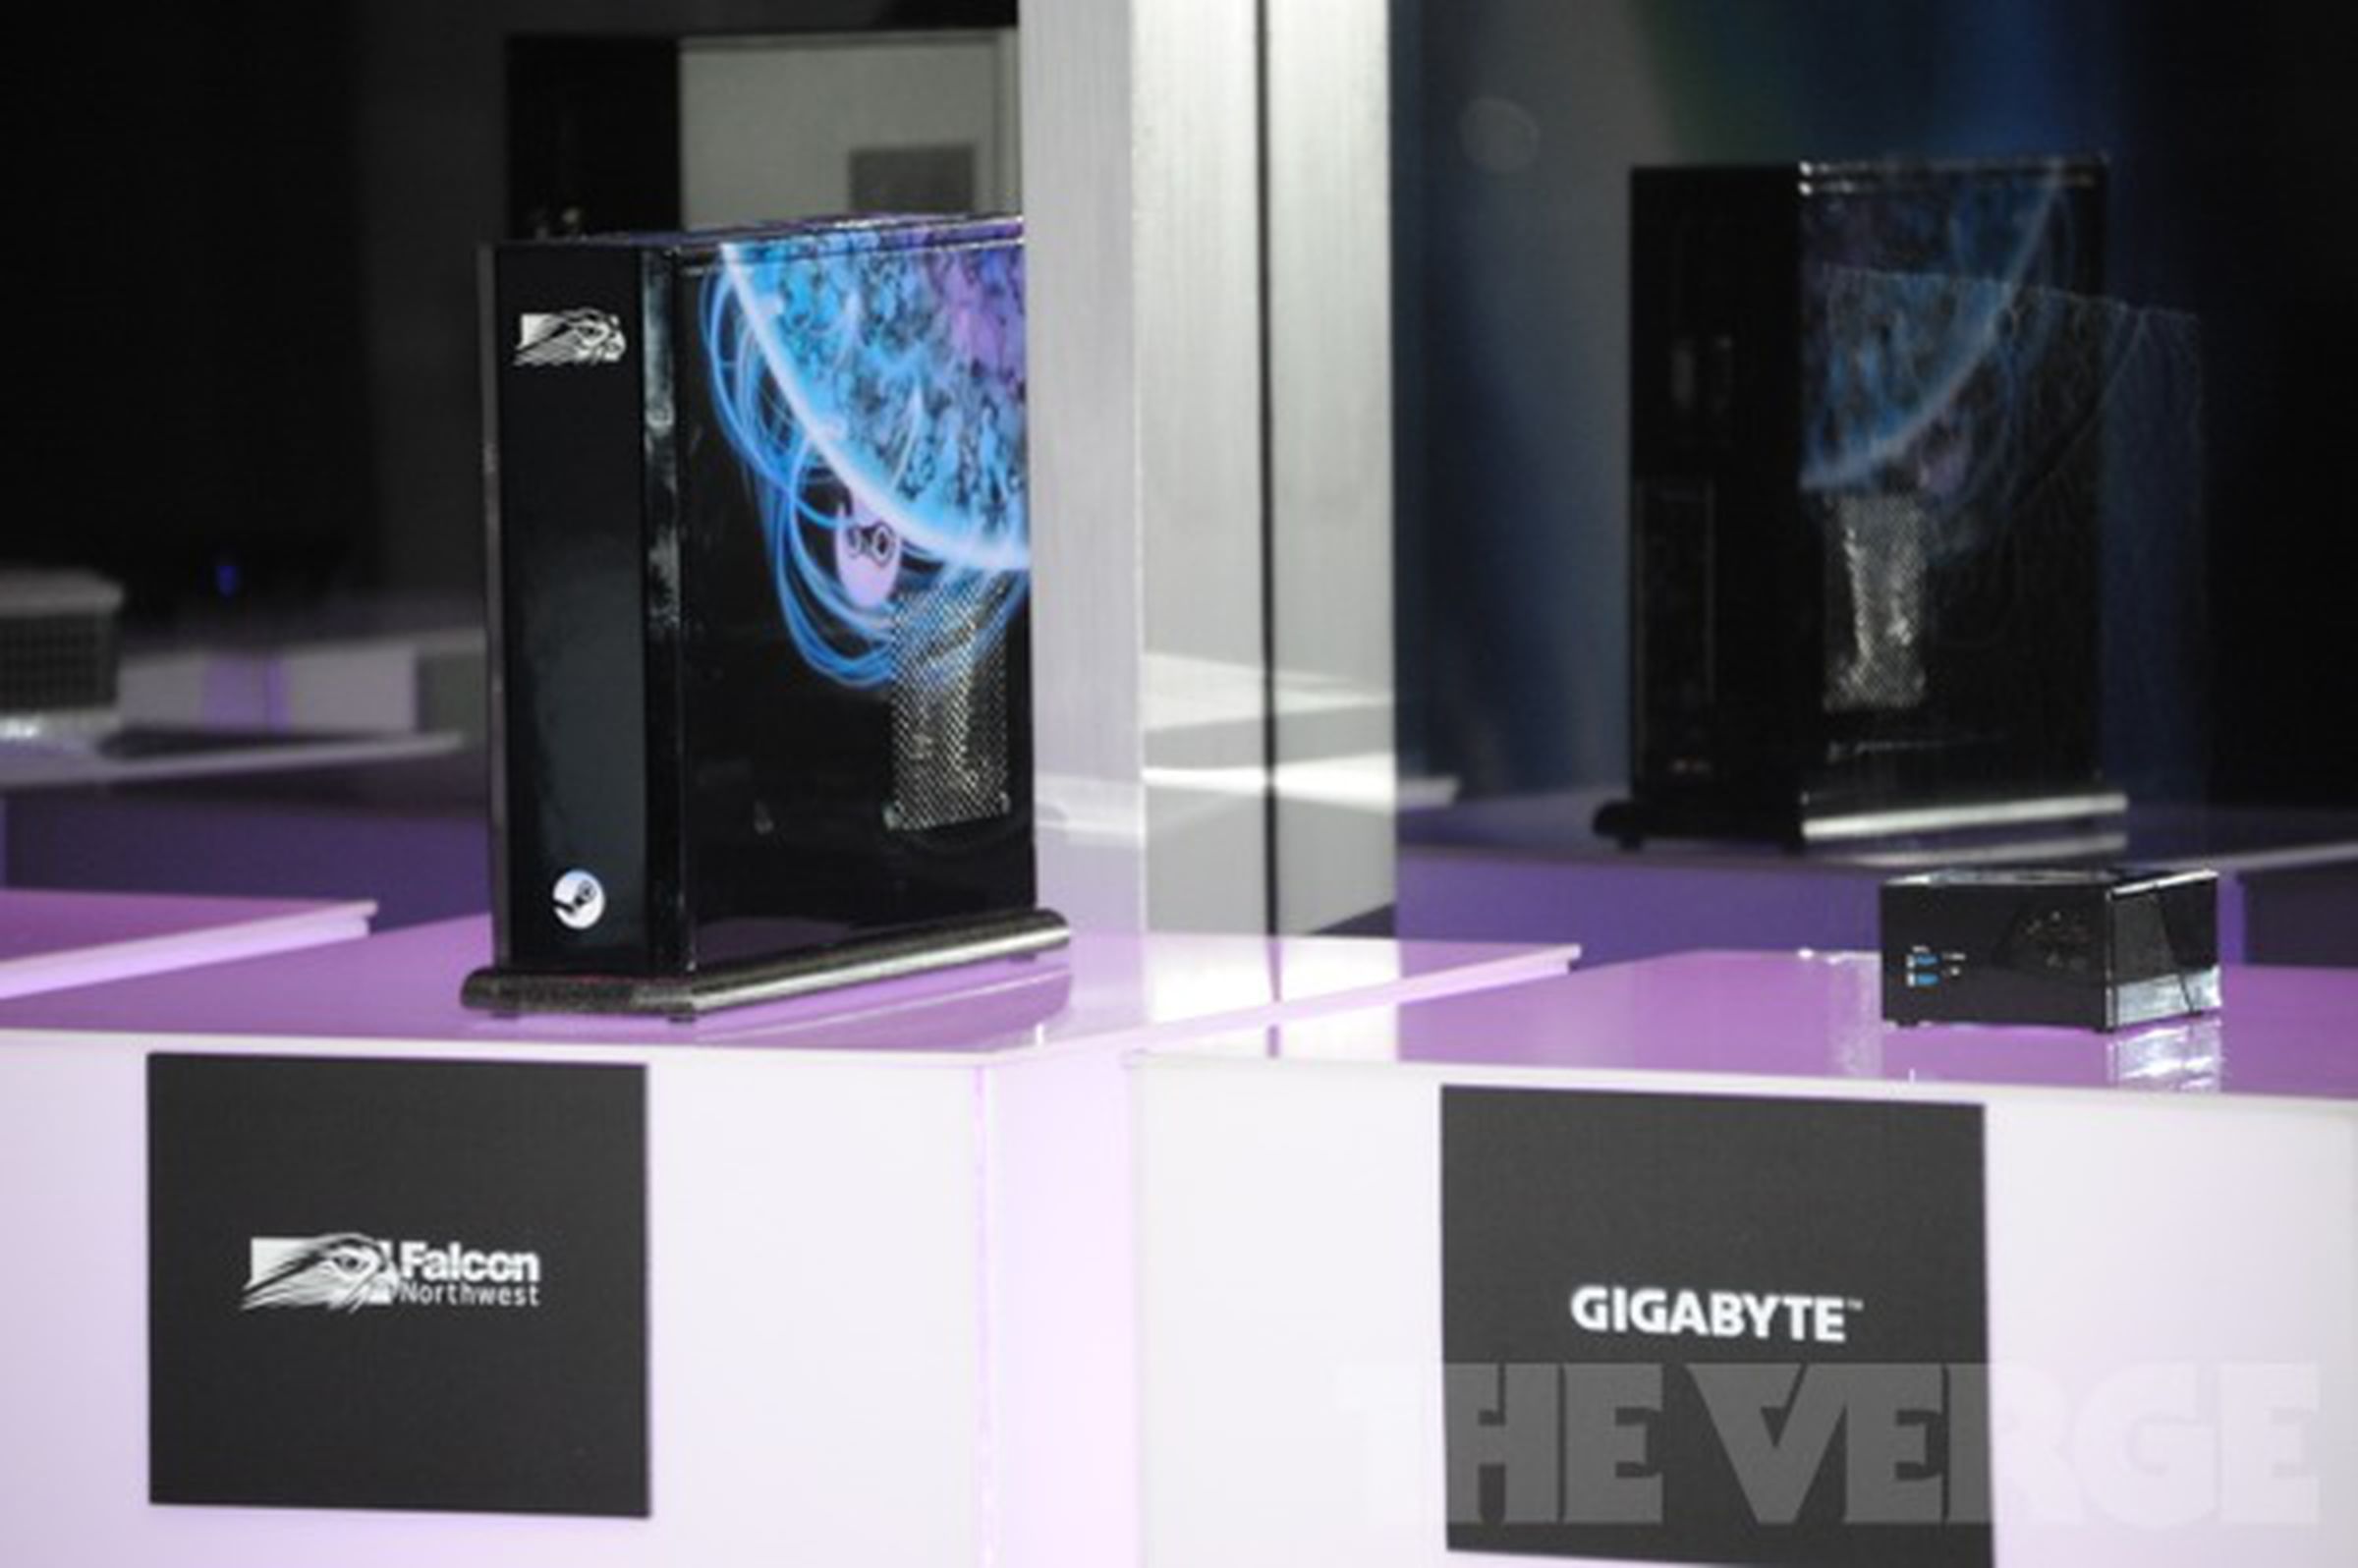 Photos of Valve's Steam Machines from its CES 2014 press conference